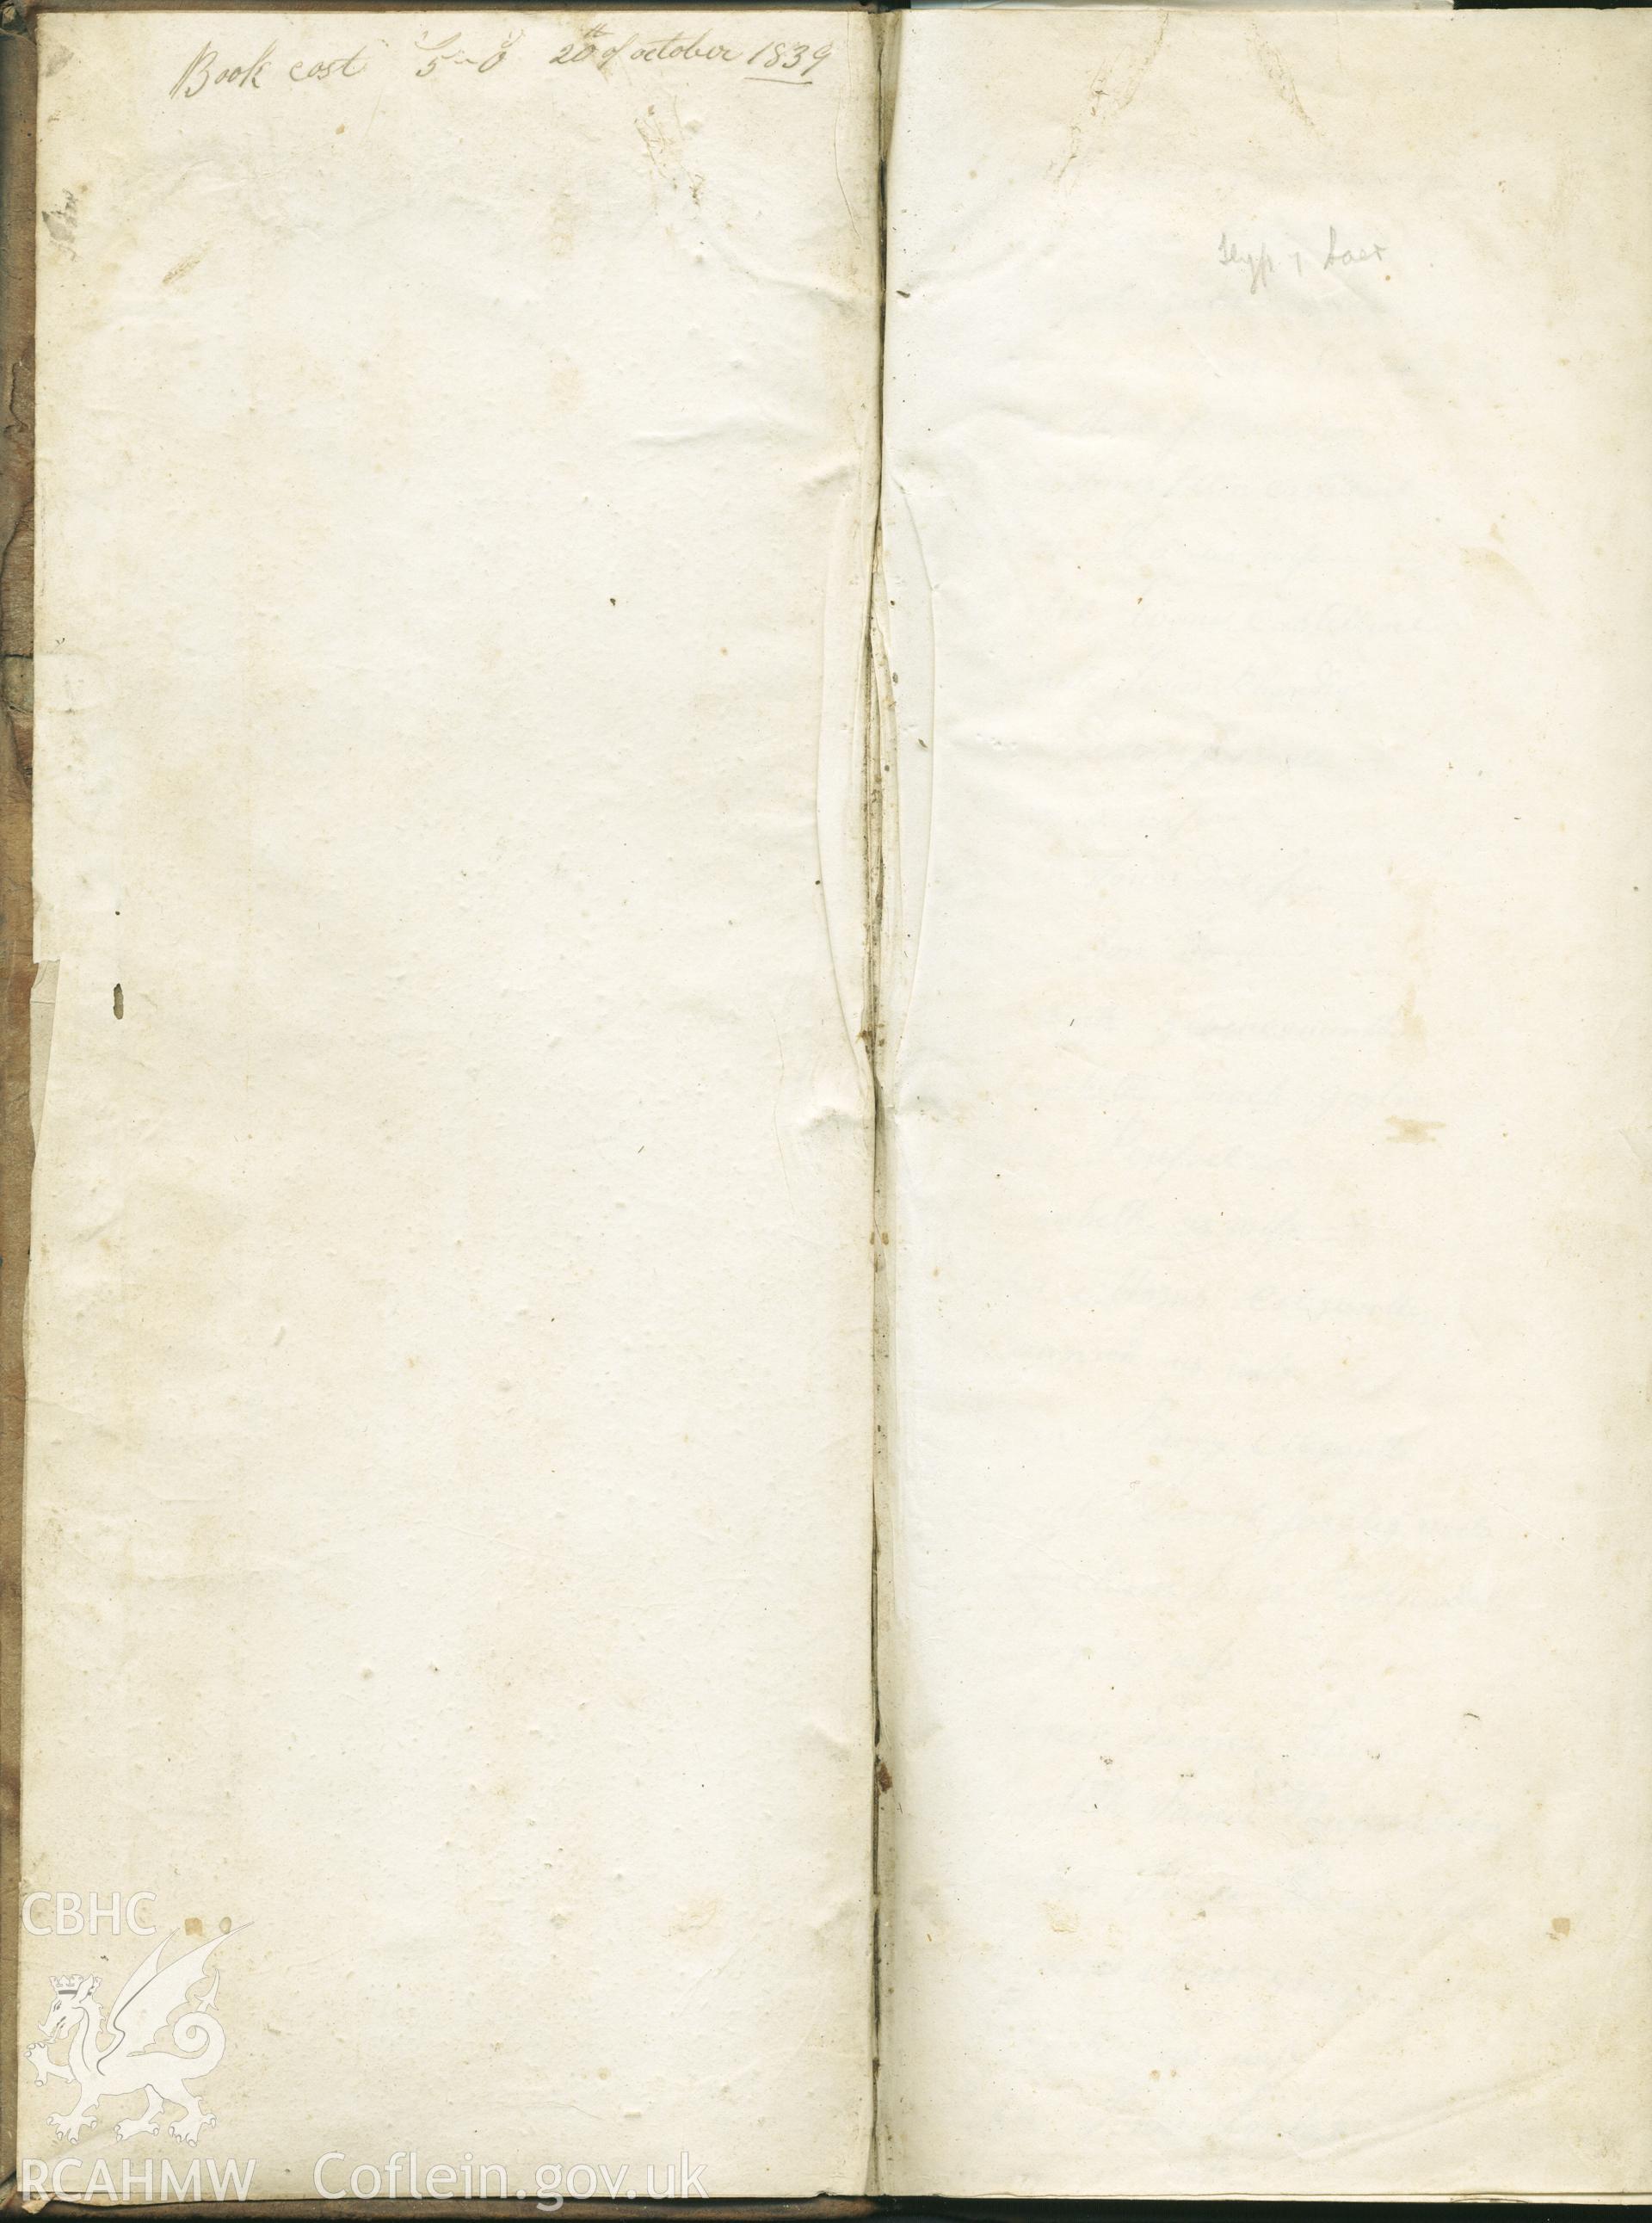 Page from handwritten Subscriber's book for yr Hen Gapel, Rhydowen. Transcript: 'Book cost 5-0 20th October 1839' and in pencil on opposite page 'Llyfr y Saer.' Donated to the RCAHMW as part of the Digital Dissent Project.